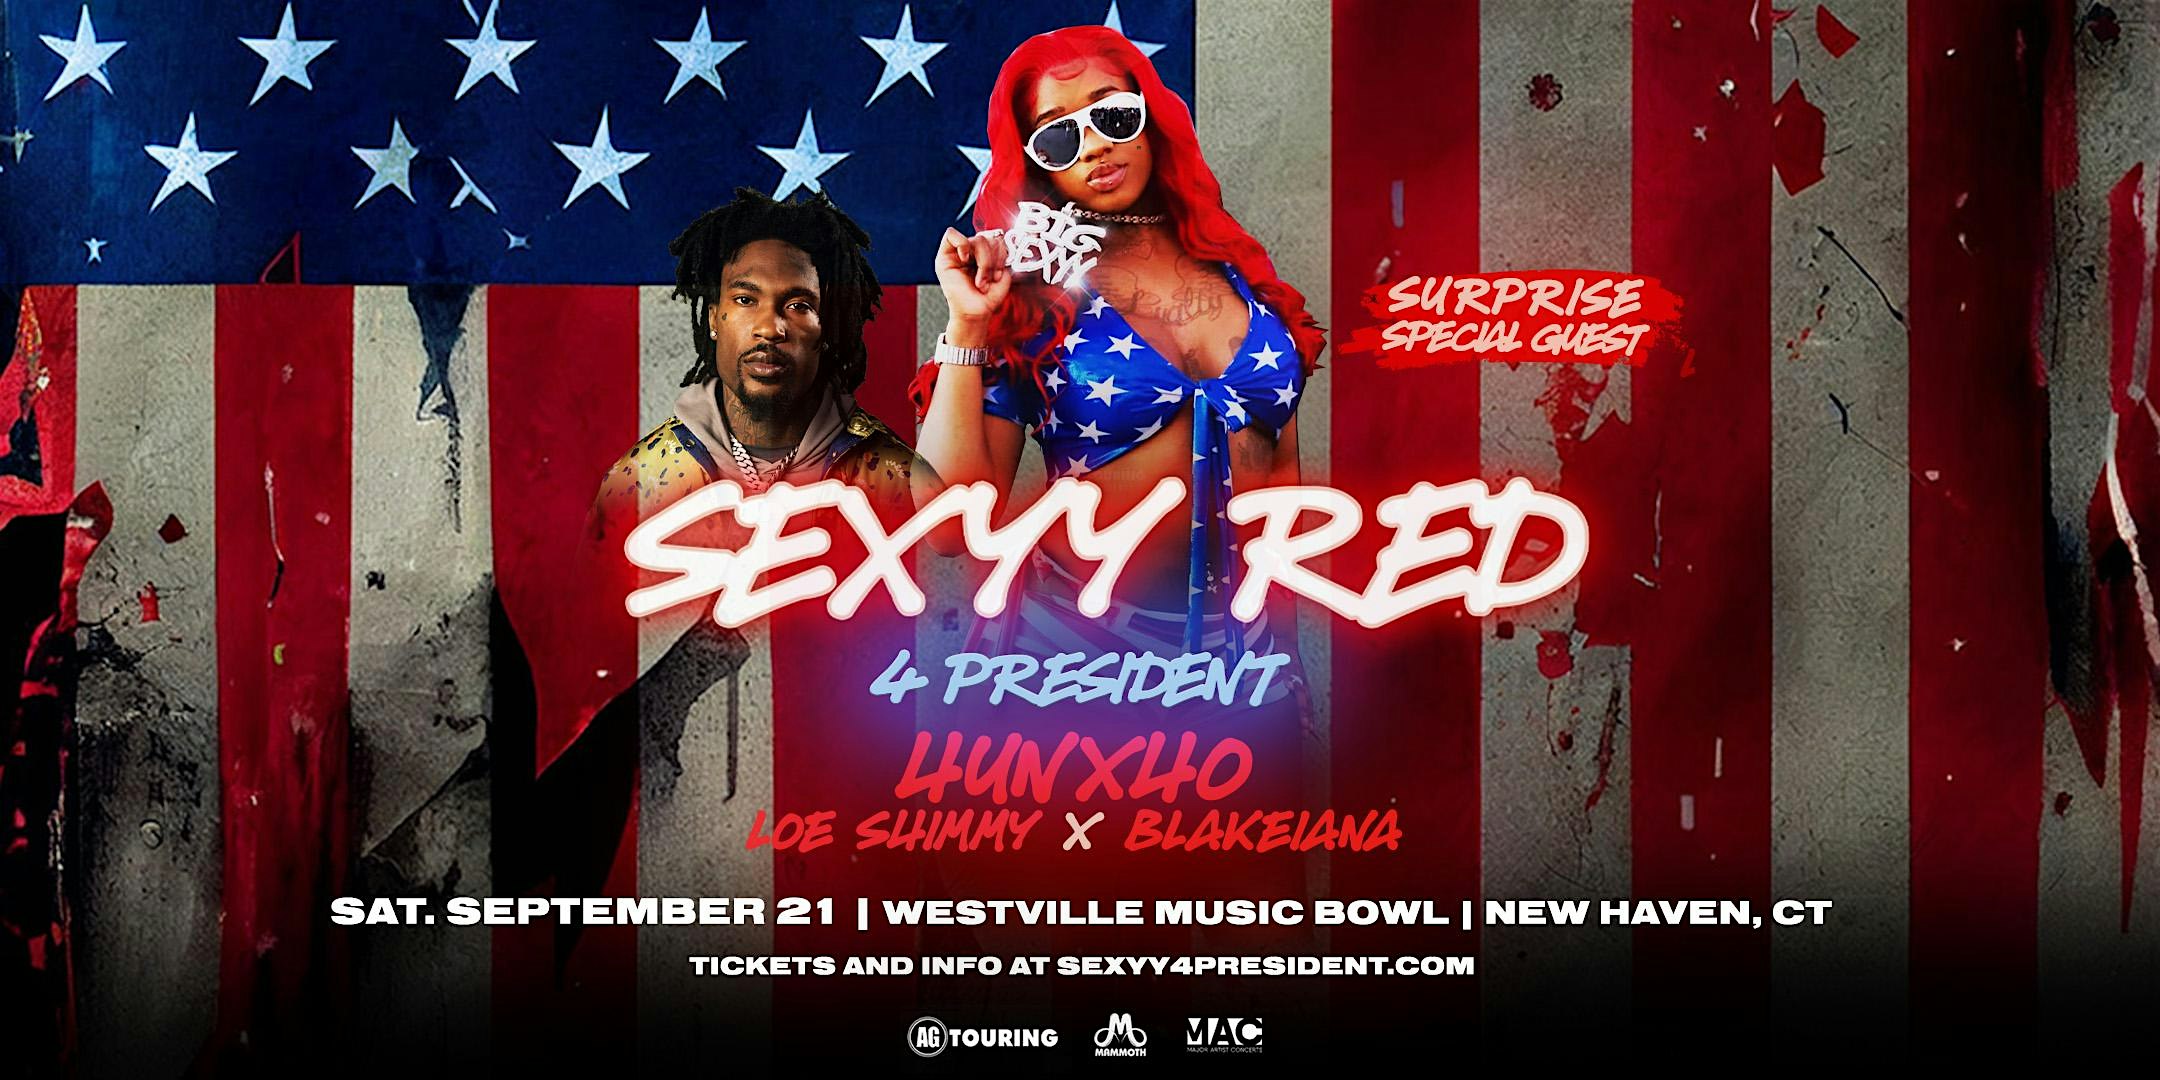 Sexyy Red: Sexyy Red 4 President Tour